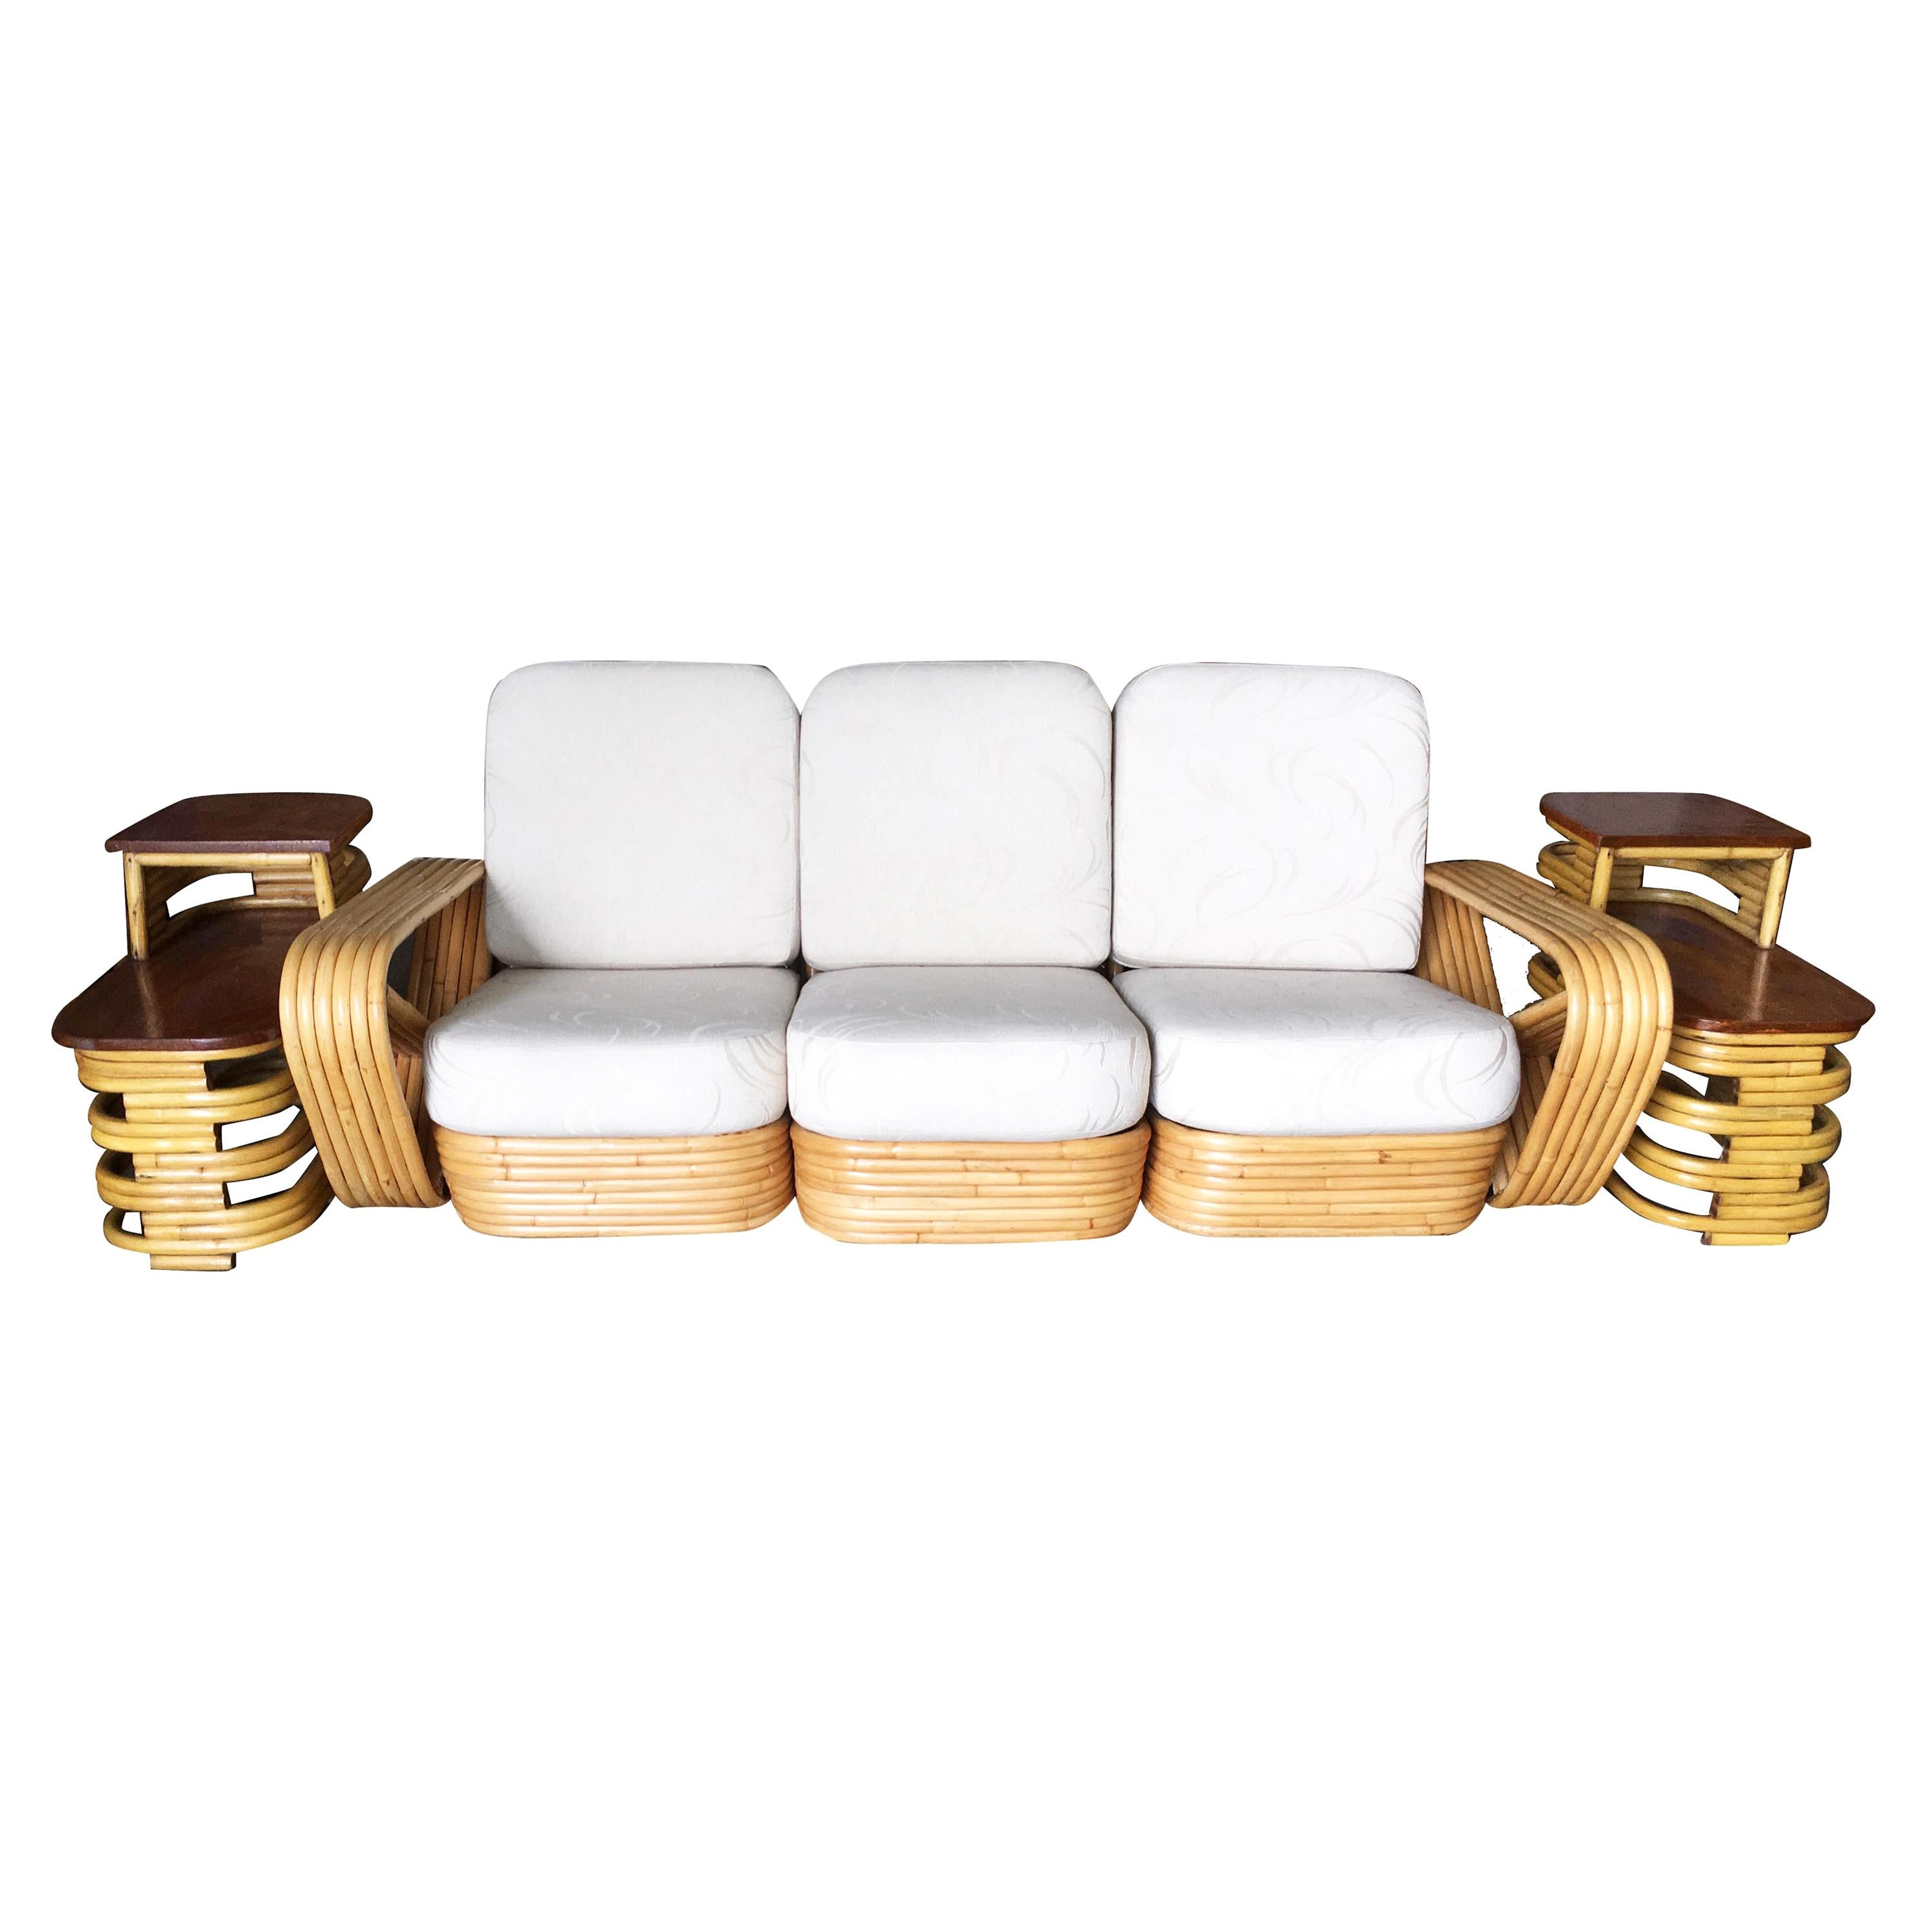  Restored Paul Frankl Six-Strand Sectional Sofa Living-Room Set with Side Tables